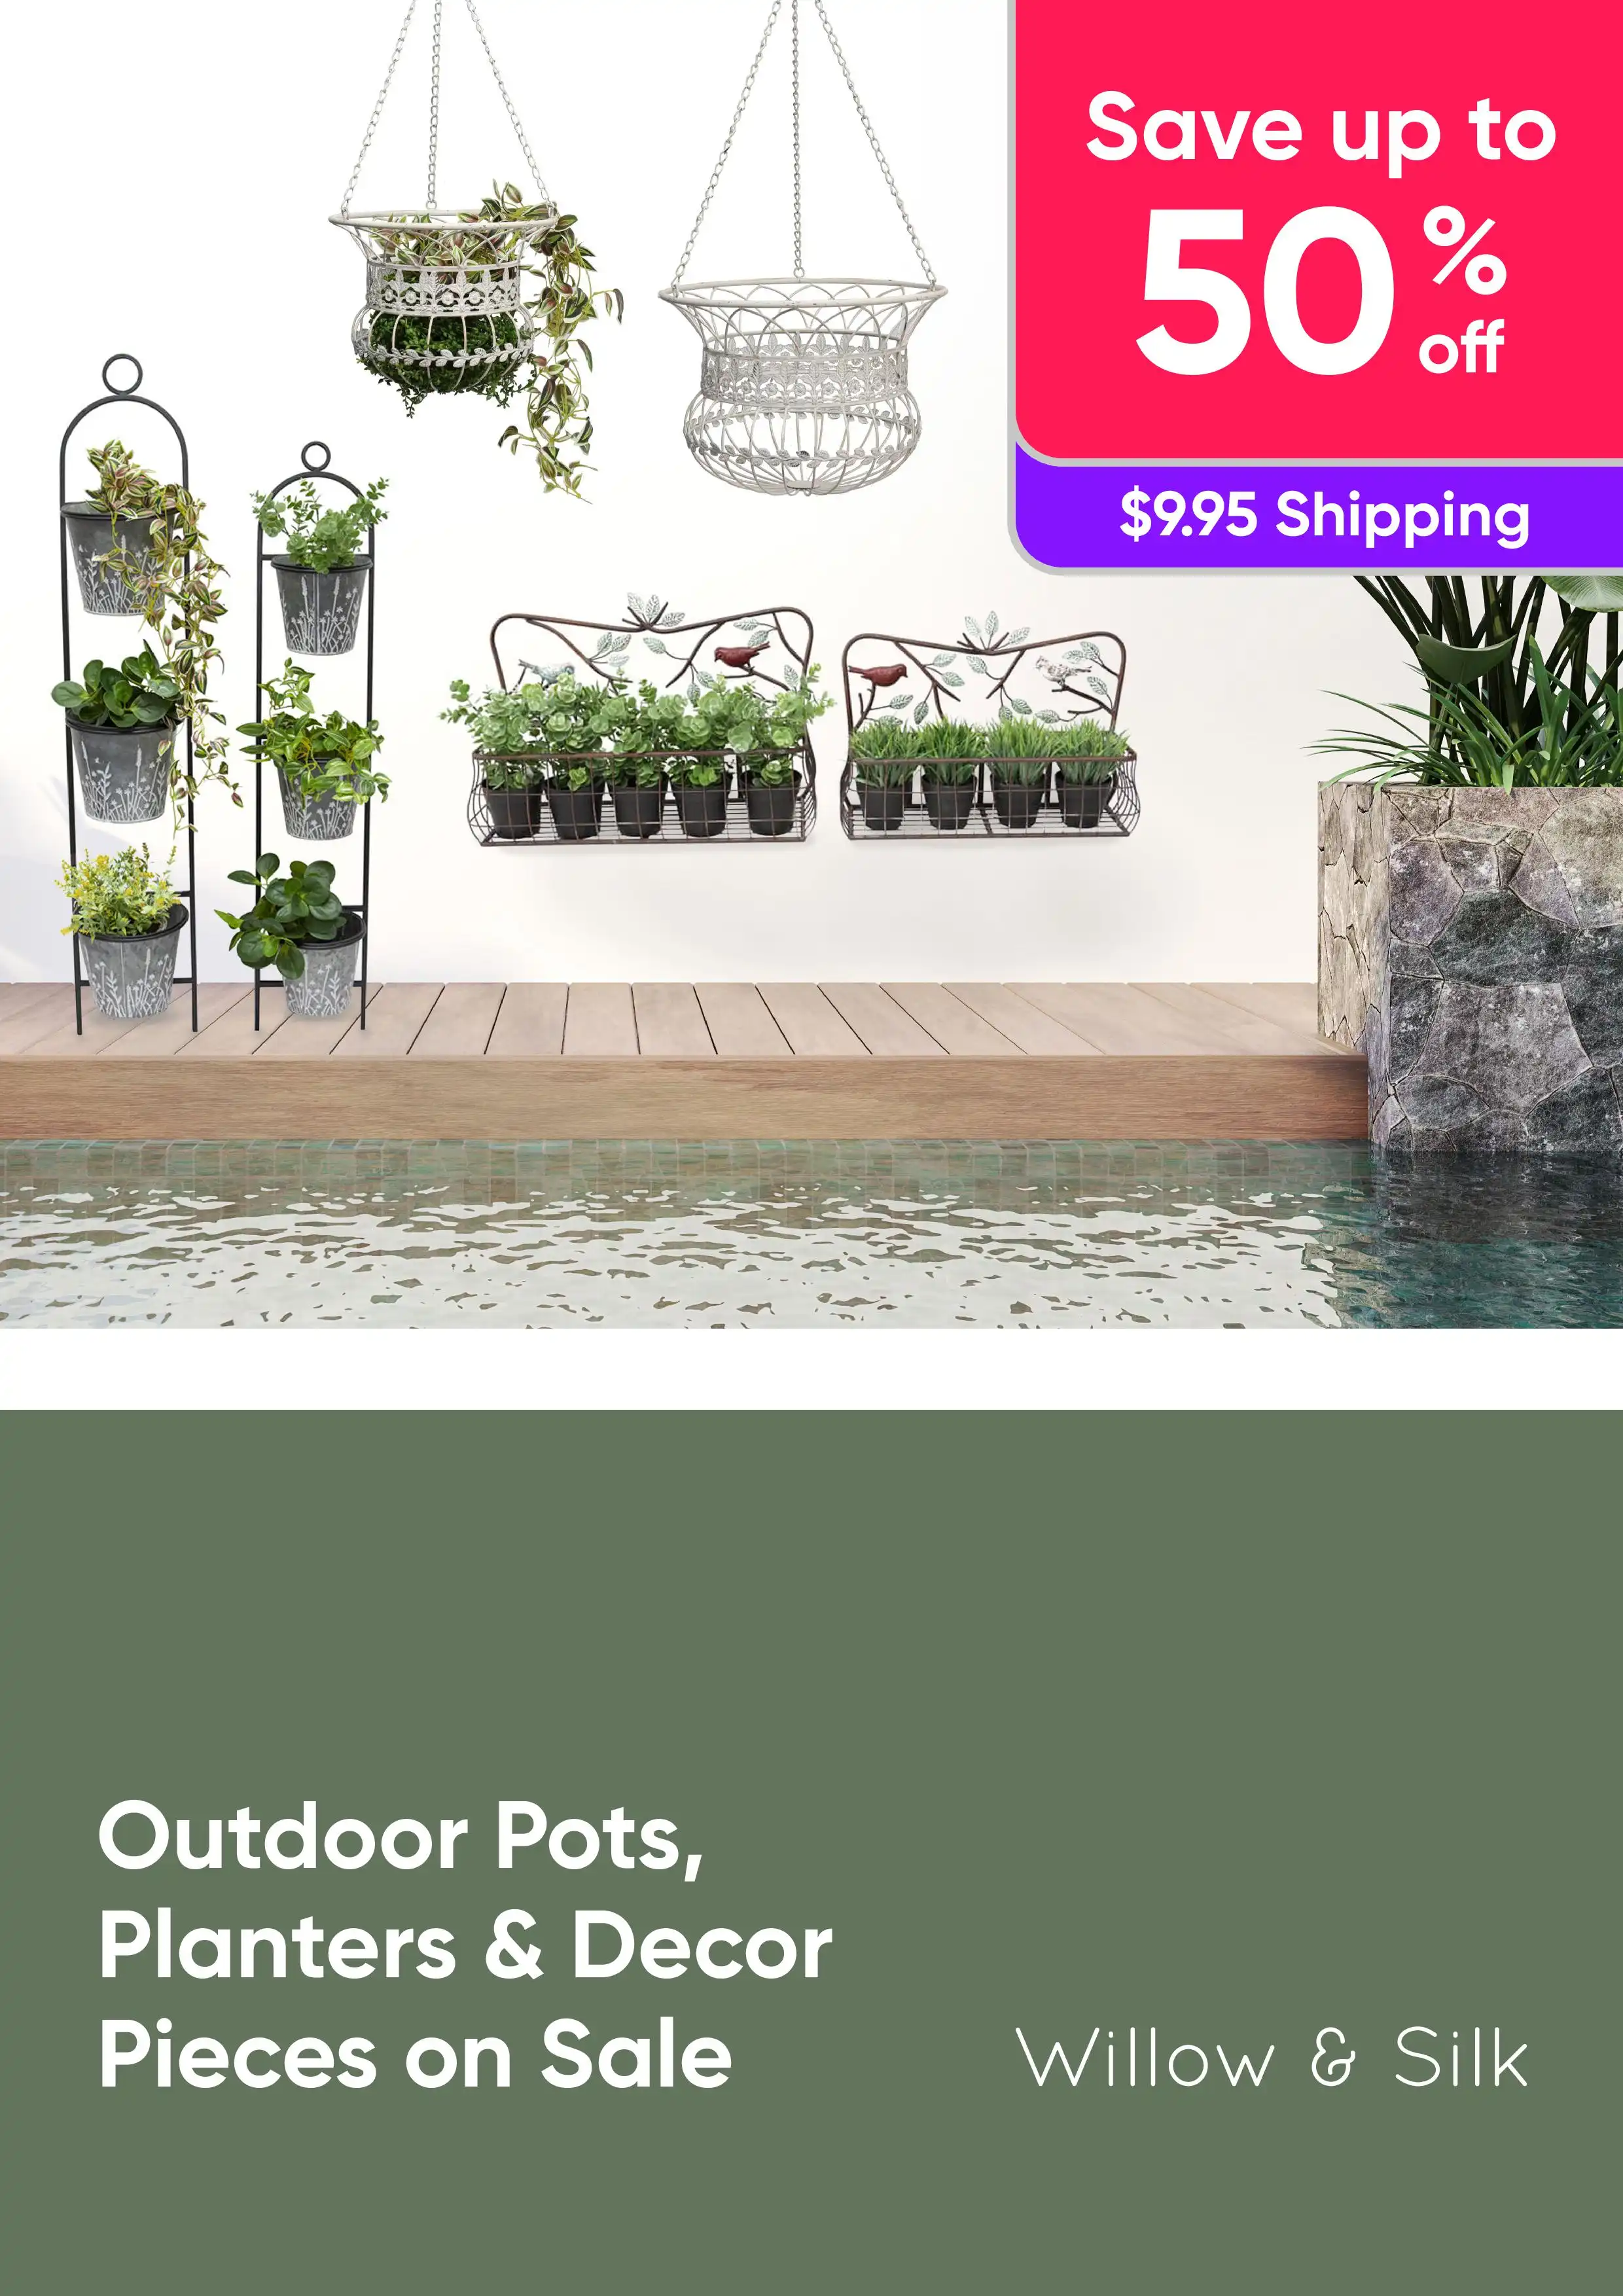 Up to 50% Off Outdoor Pots, Planters & Decor Pieces